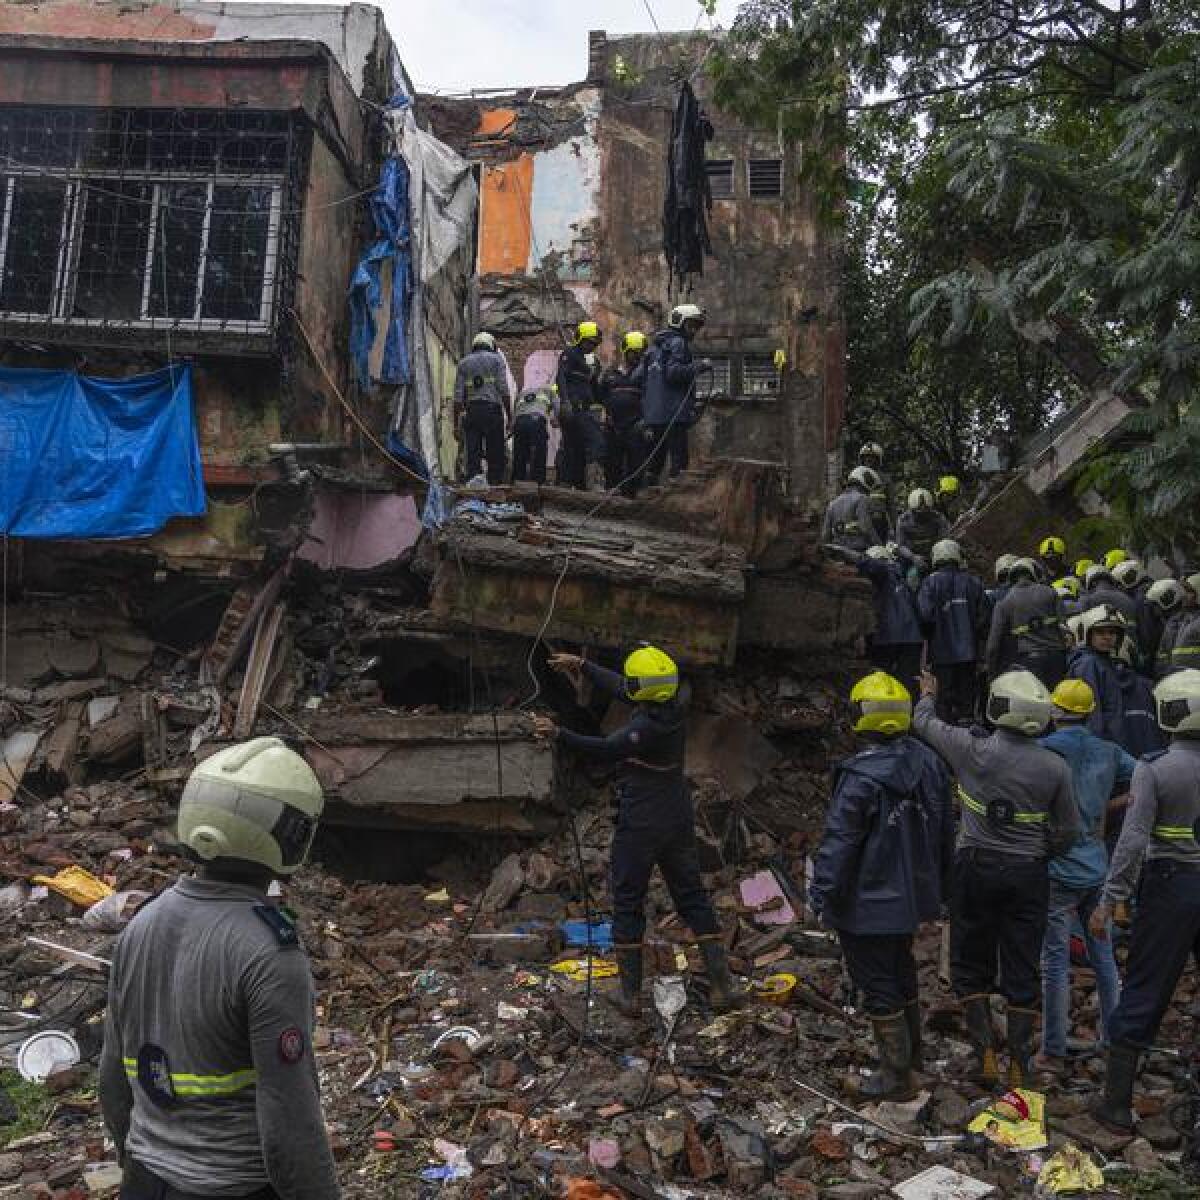 Three people died when a dilapidated building collapsed in Mumbai.